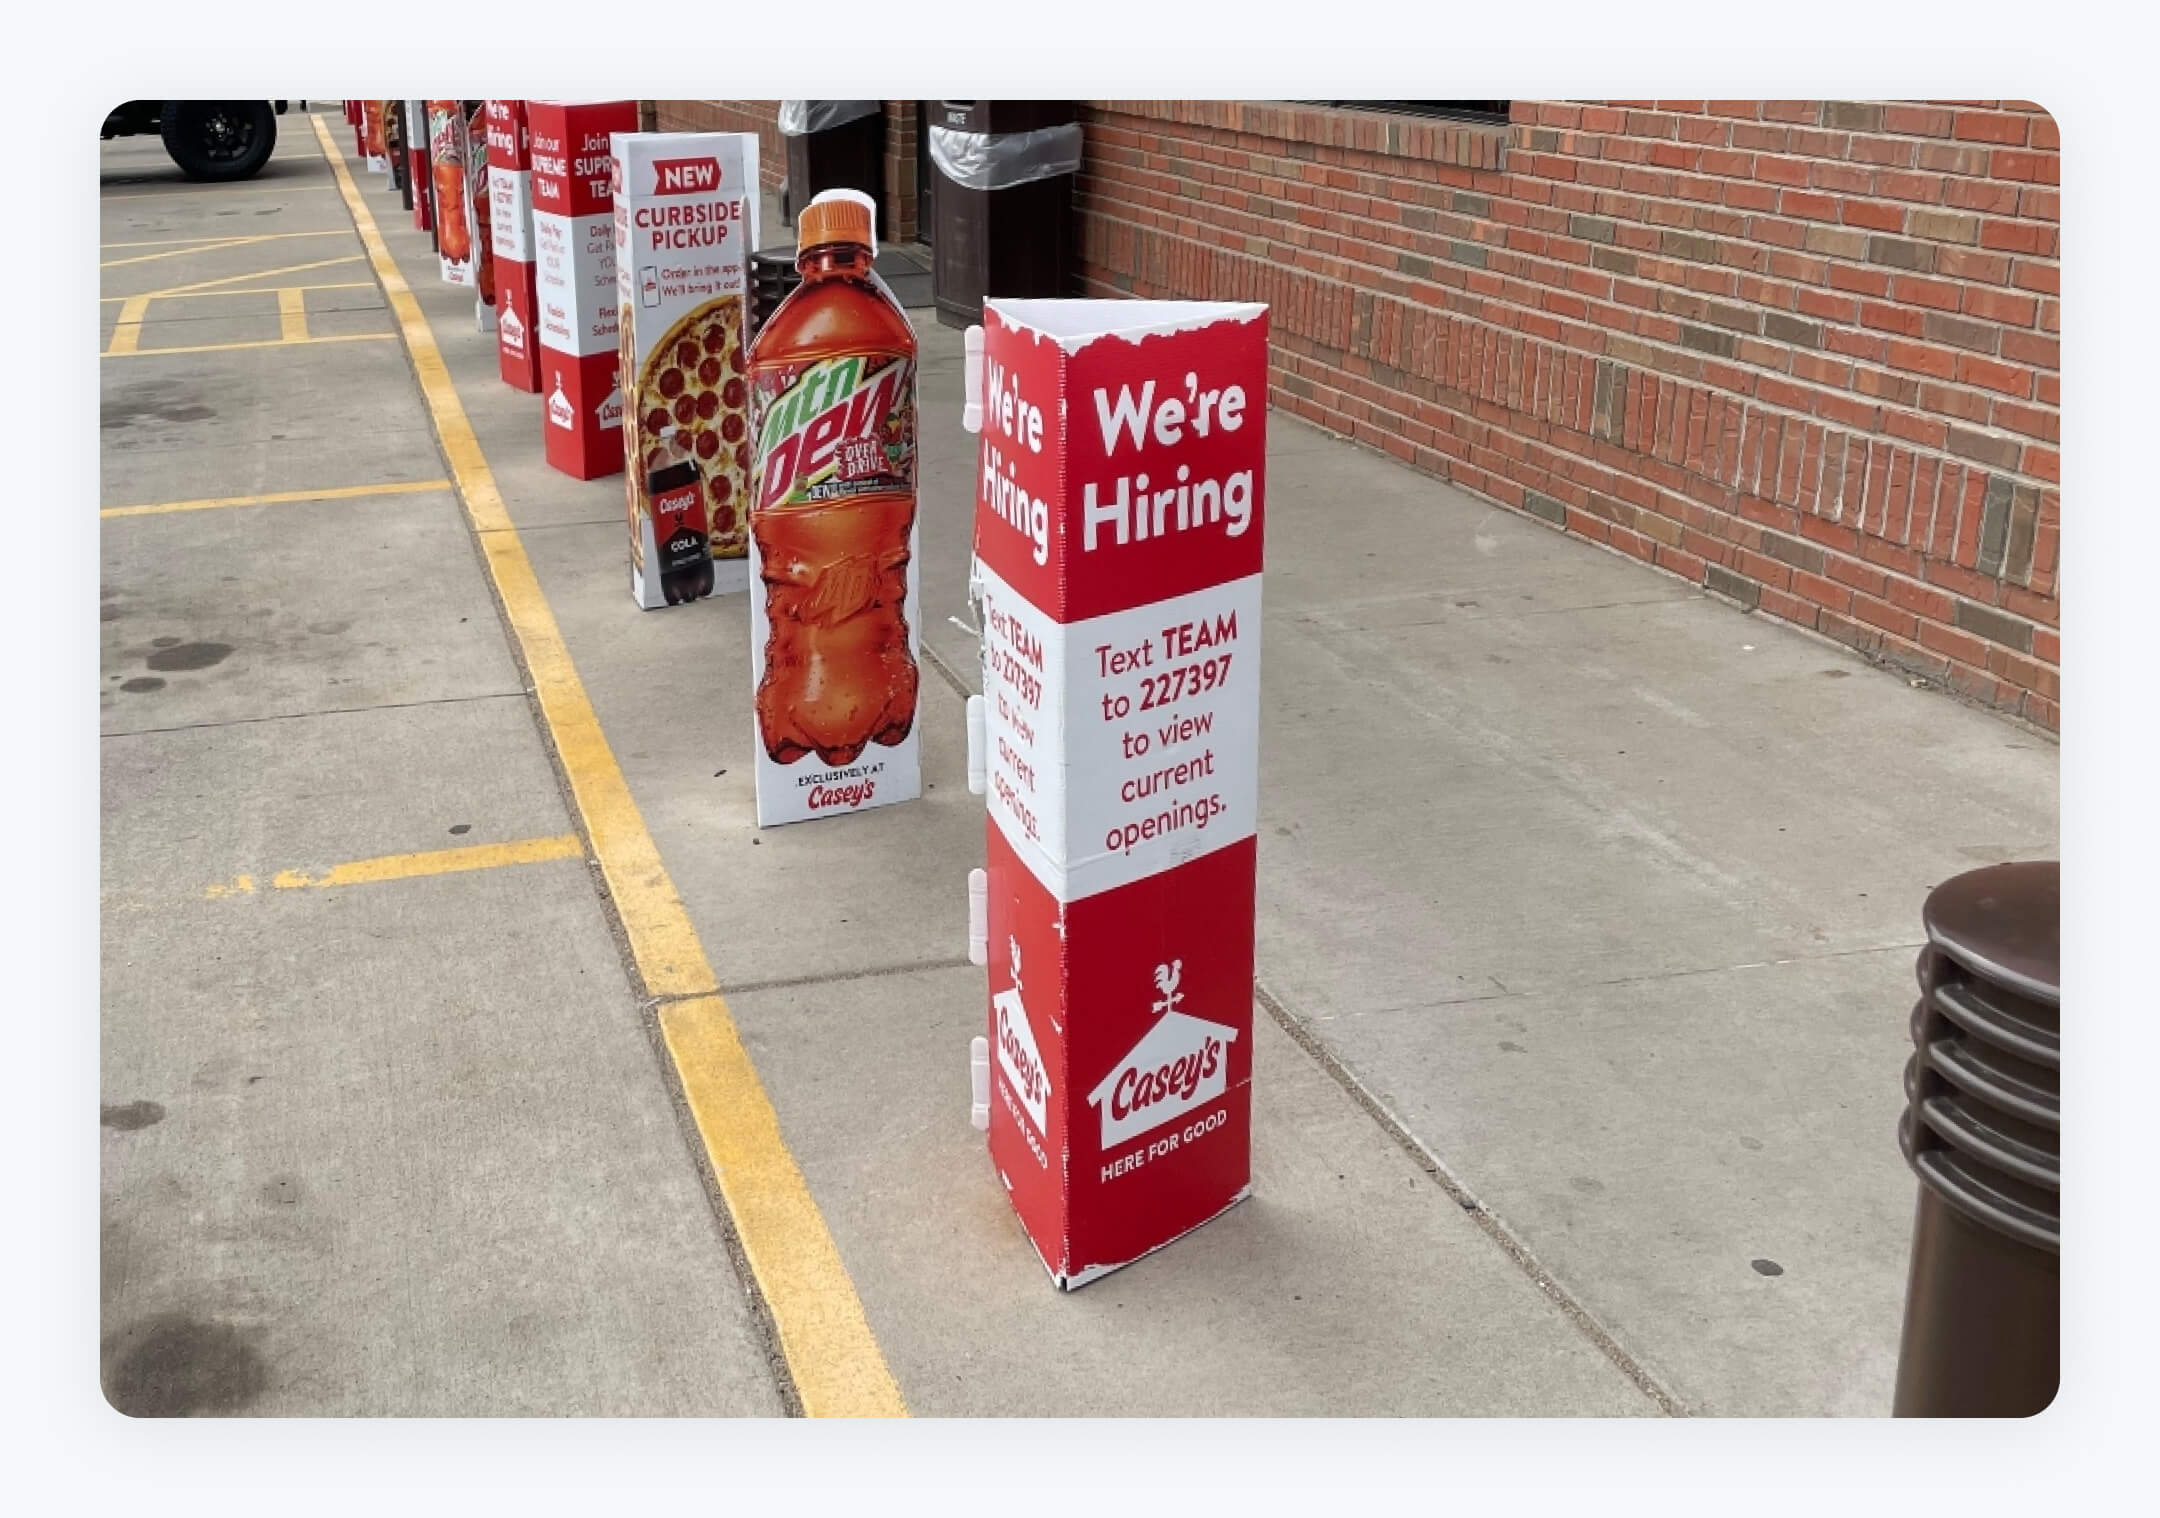 A row of vertical banner signs outside a brick building, with the closest sign prominently displaying 'We're Hiring' in large white letters on a red background. Below, it instructs to 'Text TEAM to 227397 to view current openings', aligning with the 'text to apply for job openings' initiative.